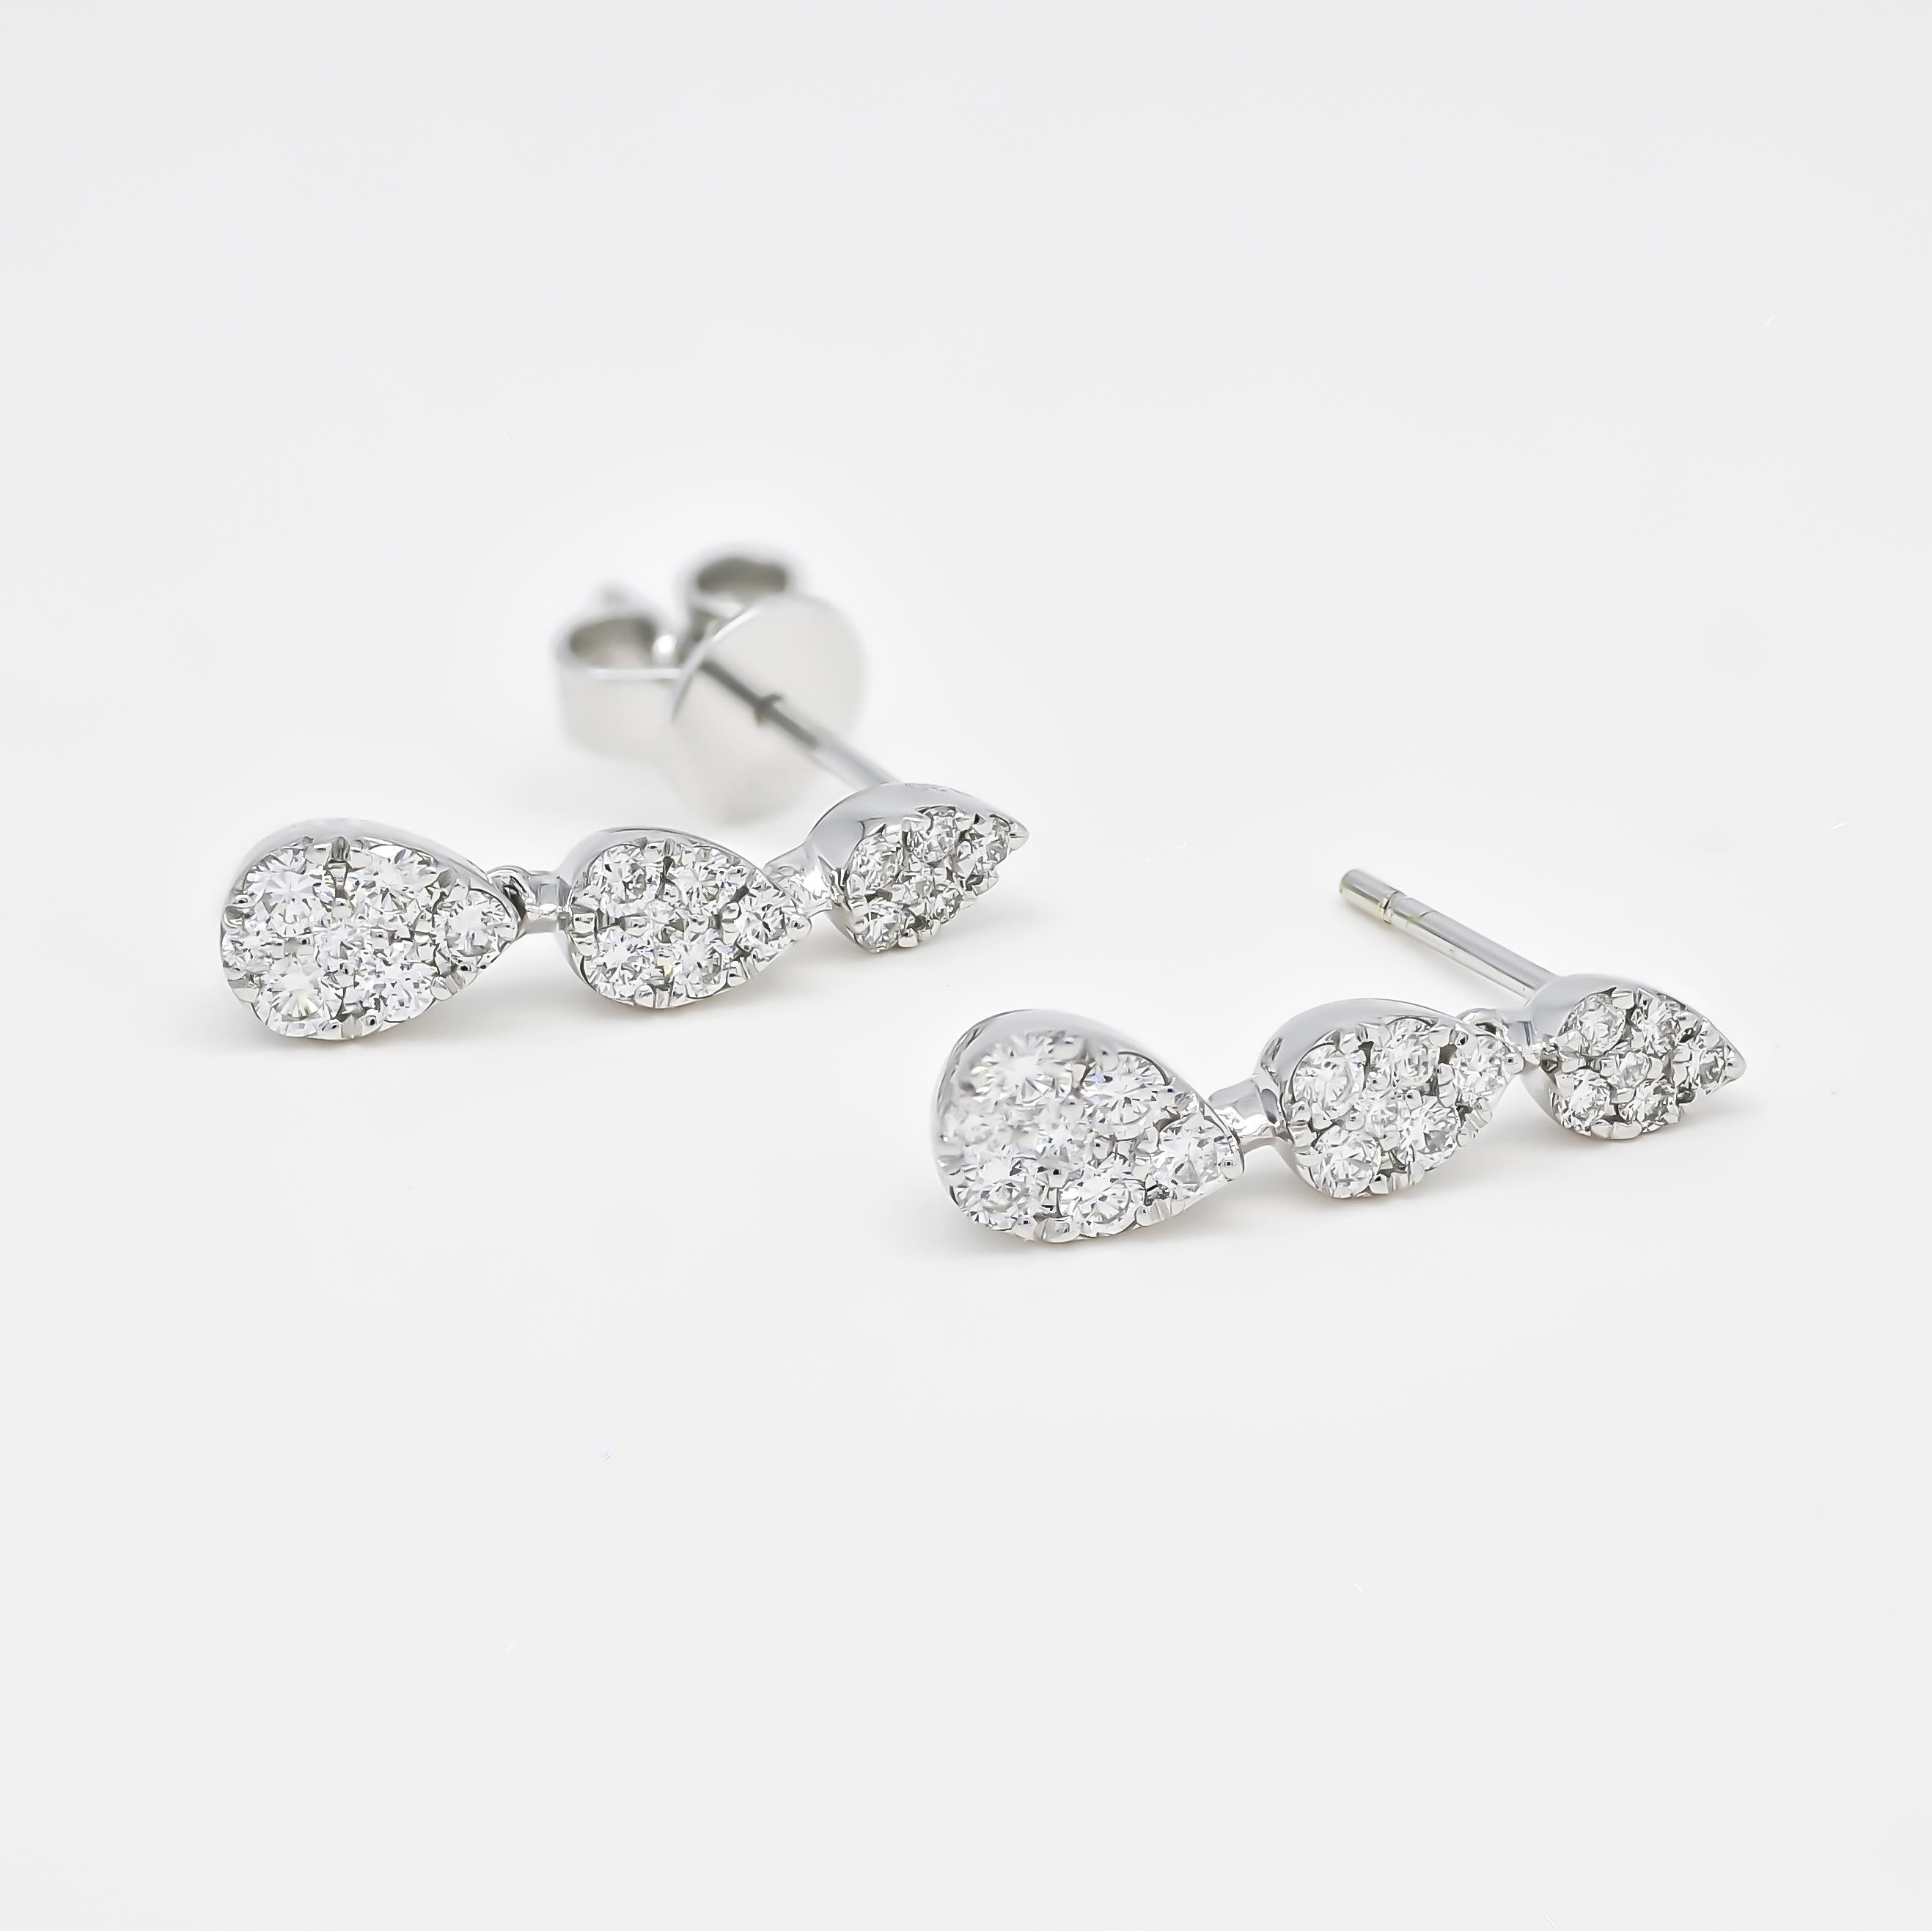 The Round Diamond Pear Shape Cluster Graduating Diamond Drop Dangler Earrings are the epitome of sophistication and luxury, perfect for any elegant occasion such as a cocktail party or wedding party. These stunning earrings feature a beautifully